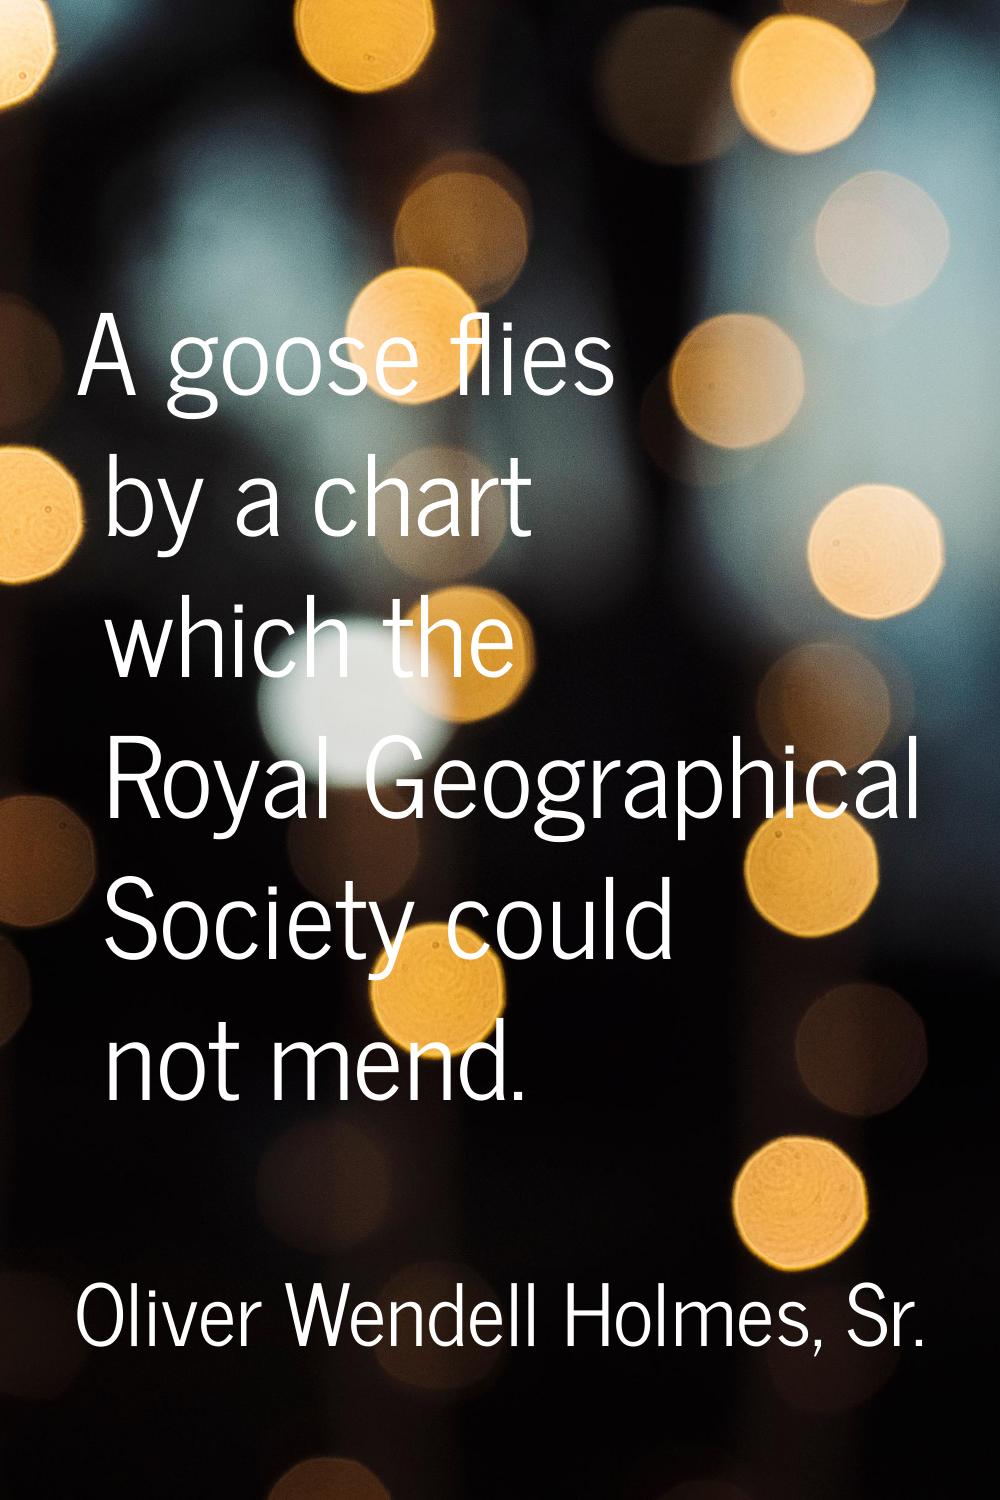 A goose flies by a chart which the Royal Geographical Society could not mend.